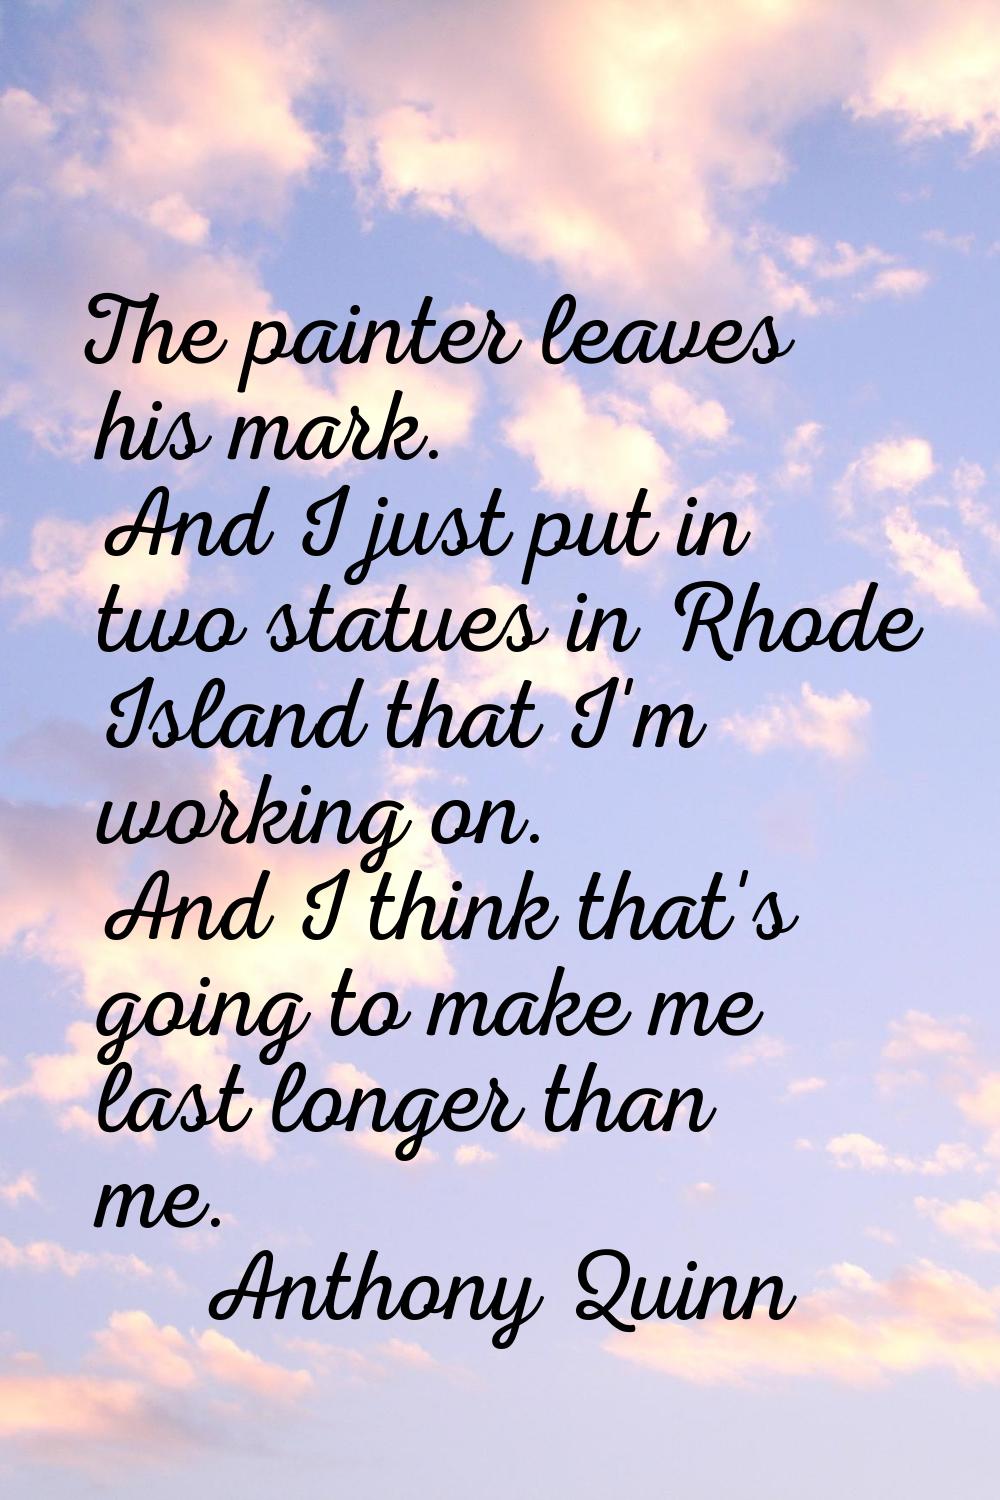 The painter leaves his mark. And I just put in two statues in Rhode Island that I'm working on. And